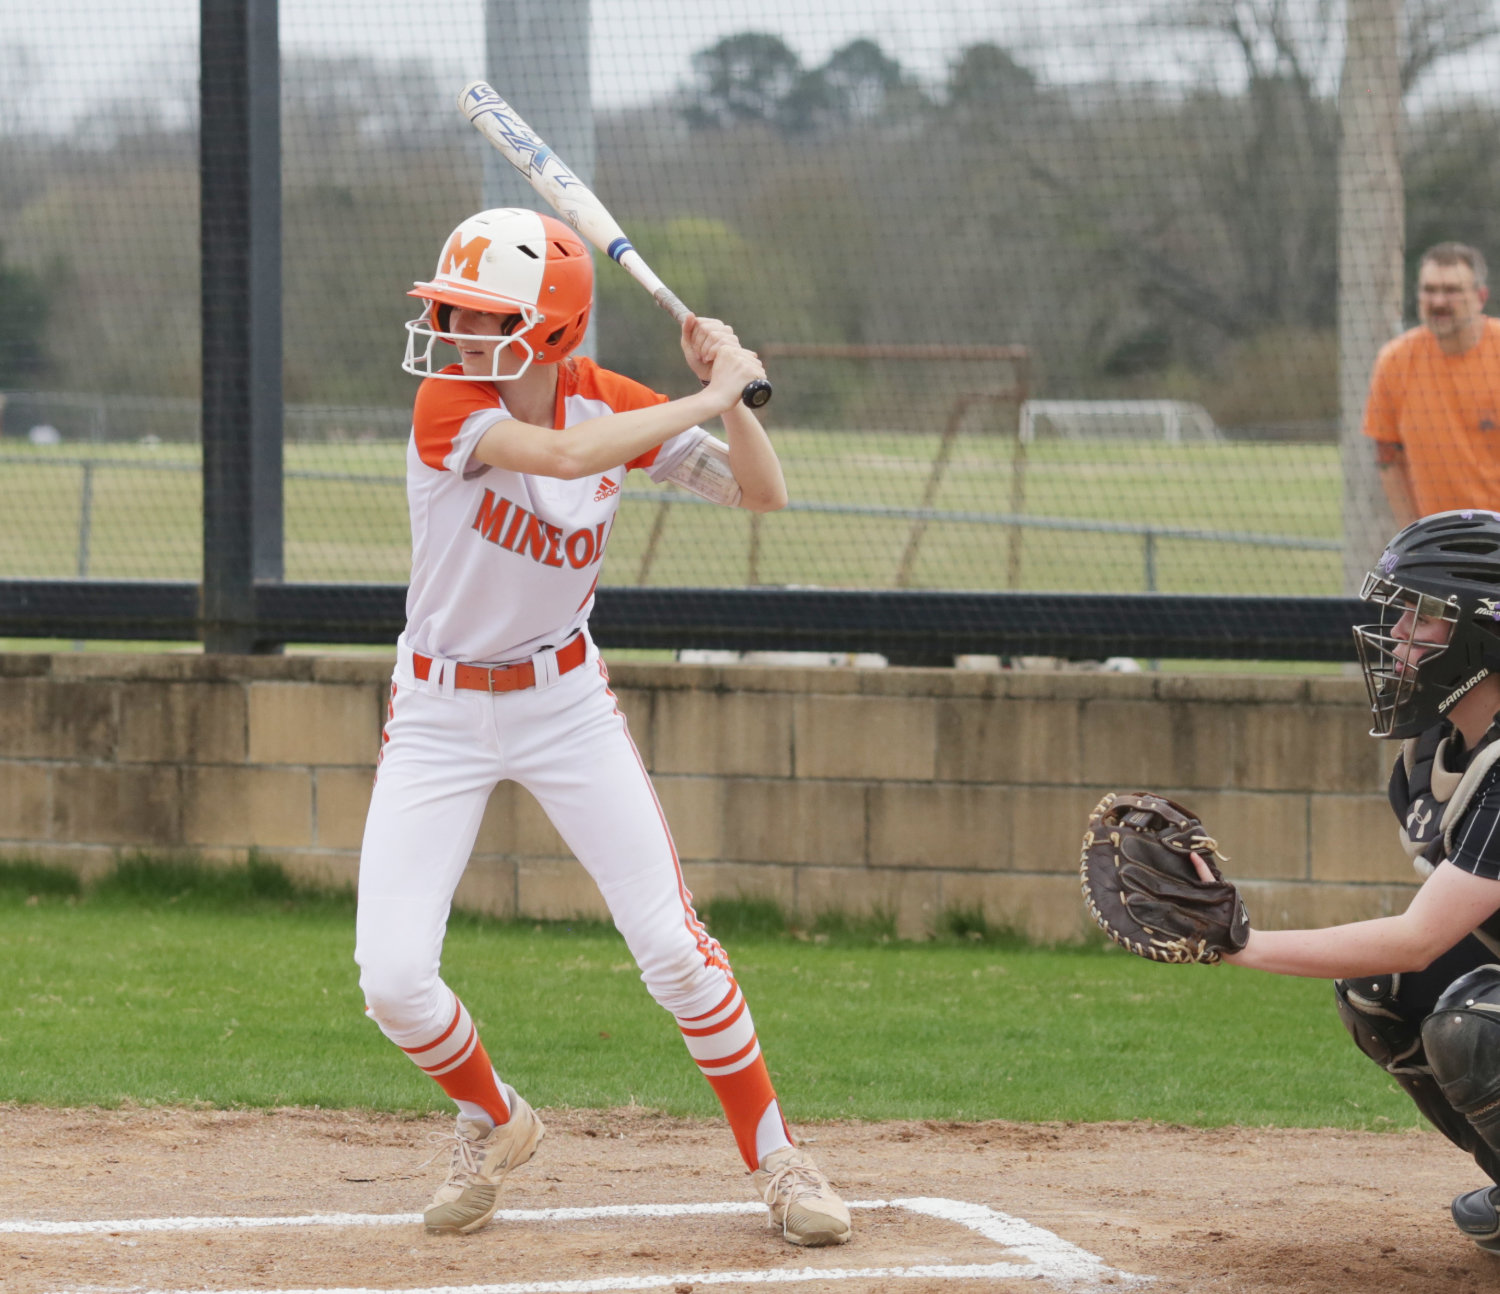 Lady Jacket Emily Wiley collected two base hits in three at bats in the district opener against Winona.